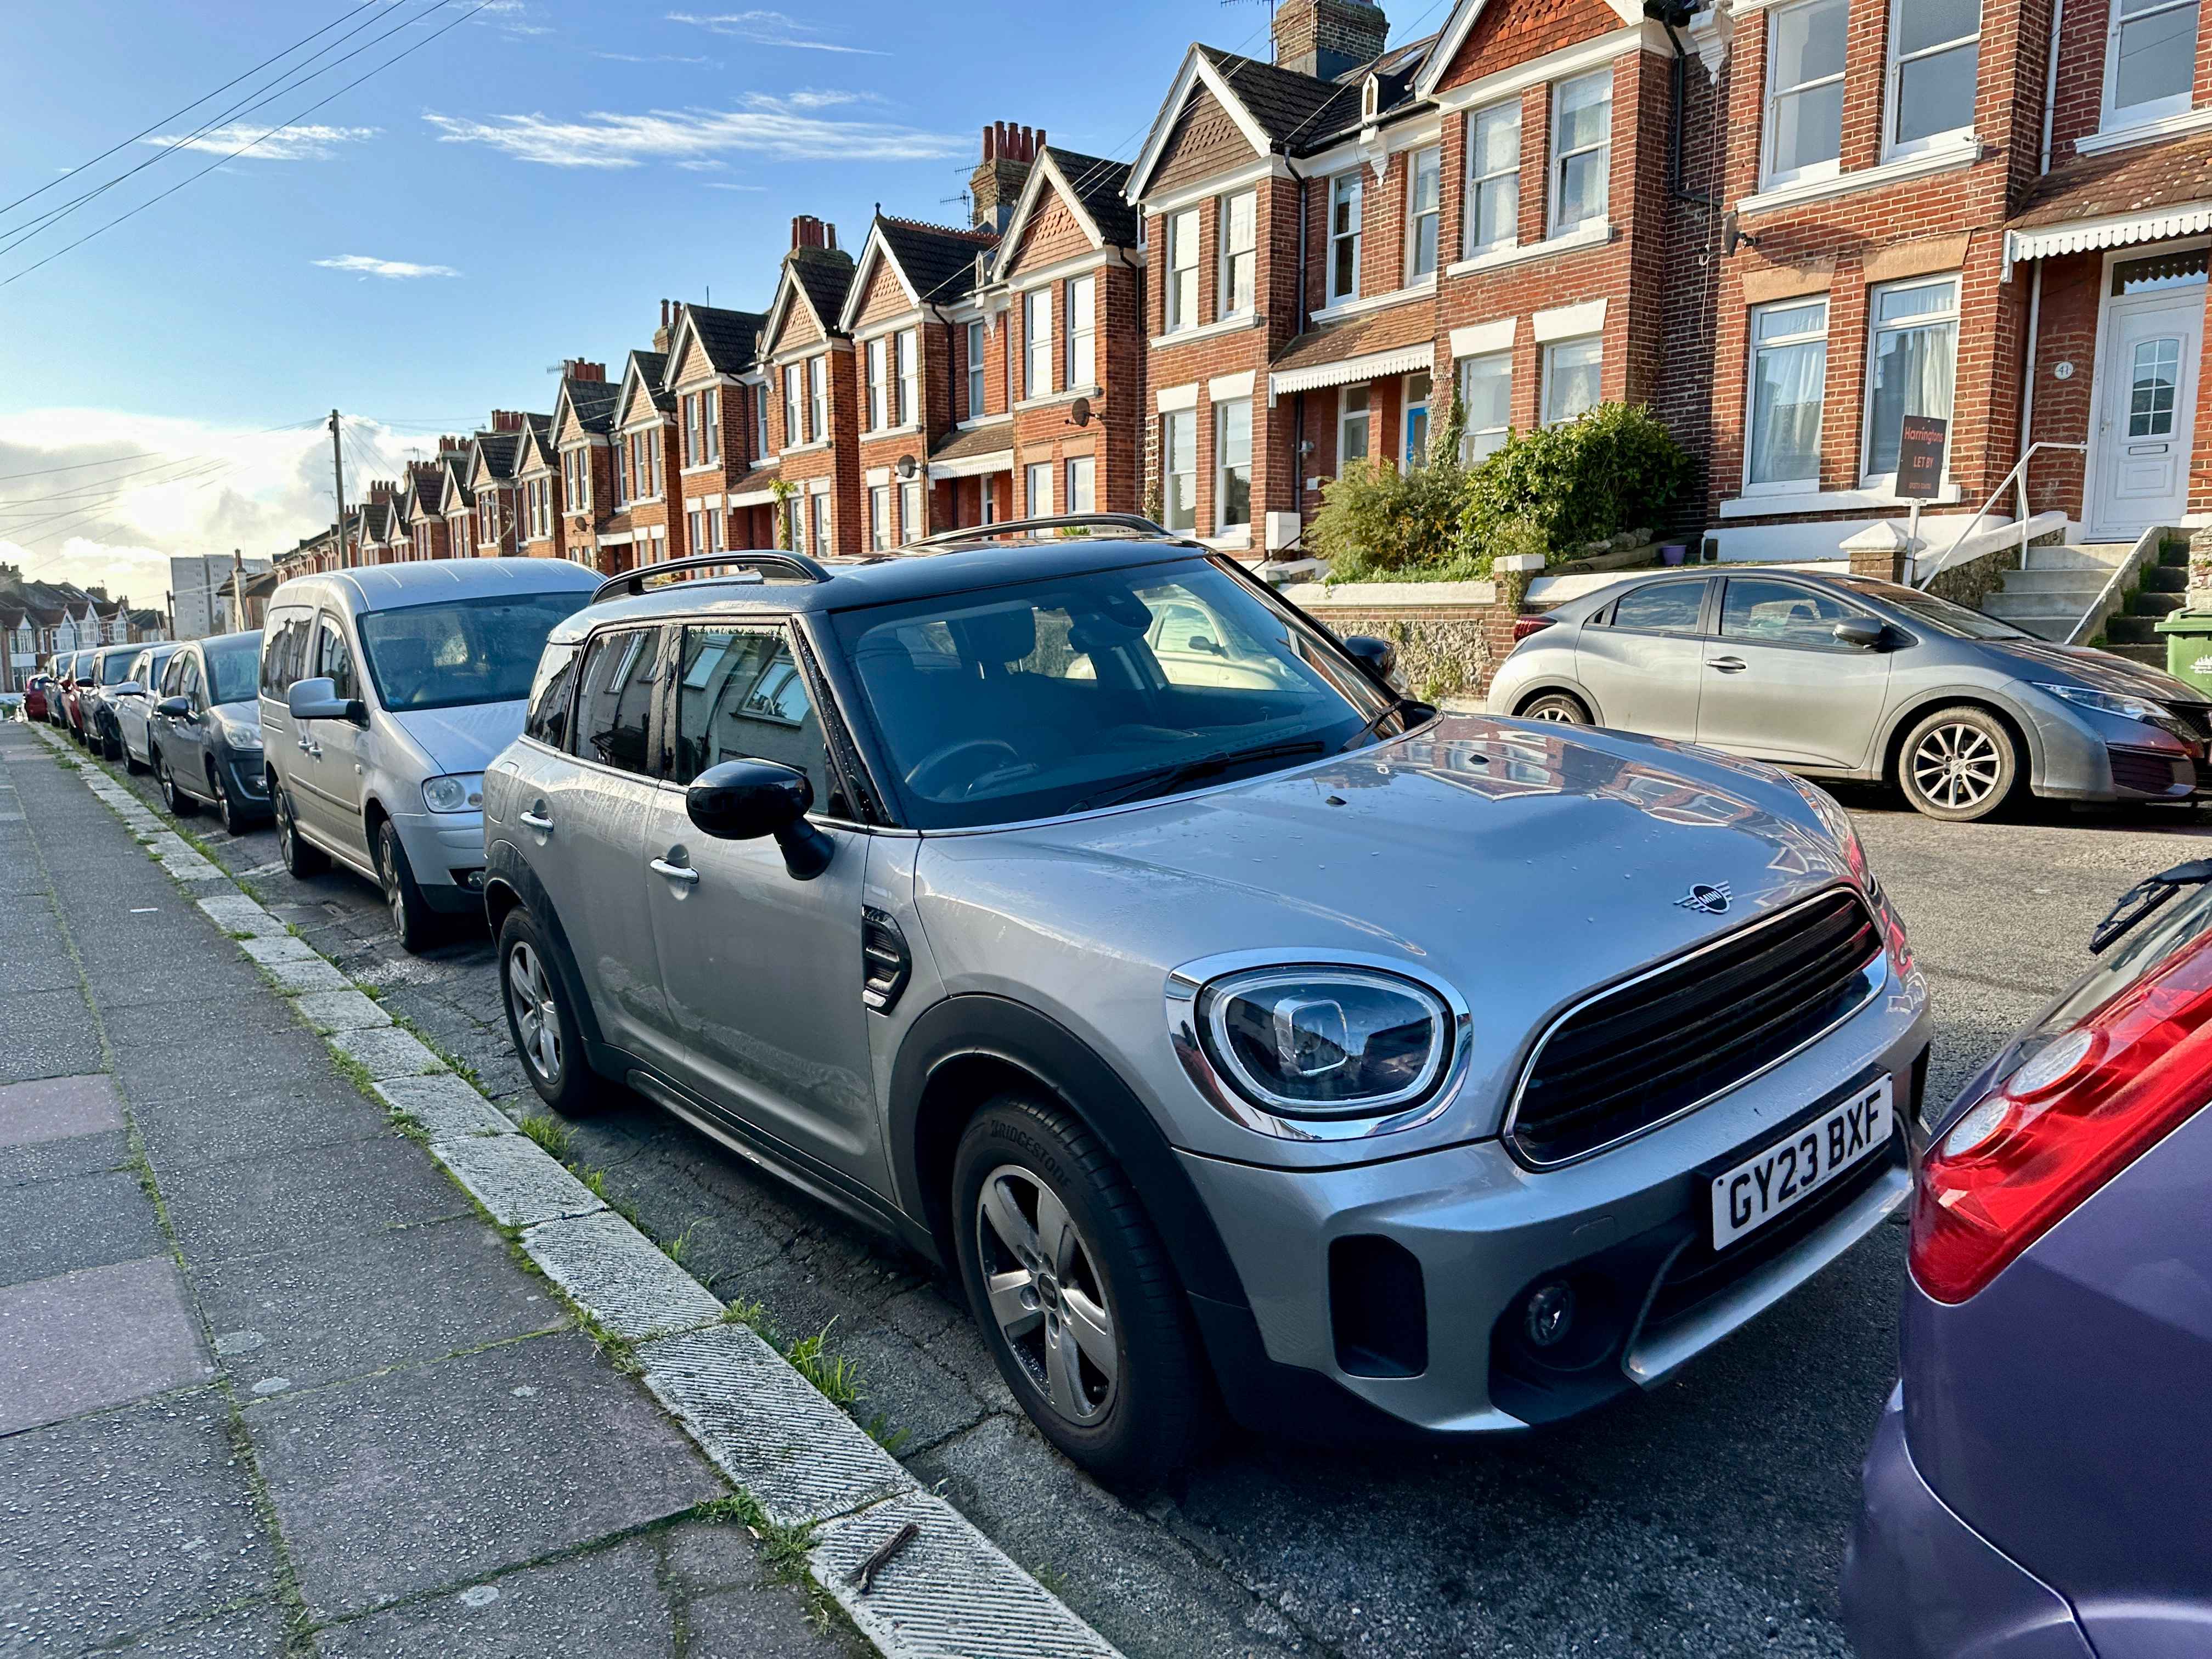 Photograph of GY23 BXF - a Grey Mini Countryman parked in Hollingdean by a non-resident who uses the local area as part of their Brighton commute. The fifth of eight photographs supplied by the residents of Hollingdean.